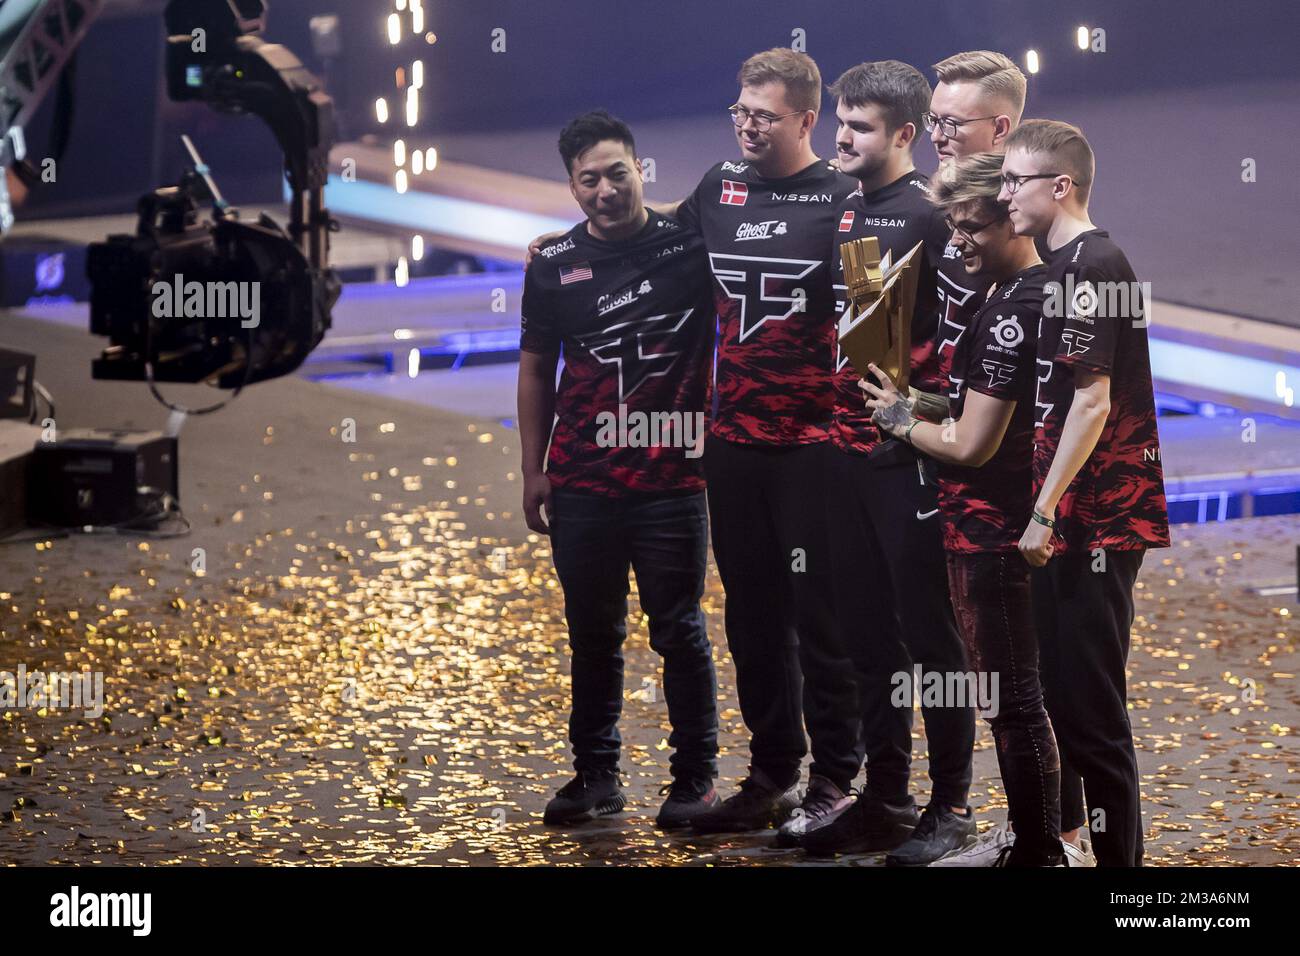 Players of Faze Clan pictured after winning the finals of the World Championship of the Counter-Strike-Global Offensive' first person shooter computer game, Sunday 22 May 2022 in Antwerp. BELGA PHOTO KRISTOF VAN ACCOM Stock Photo